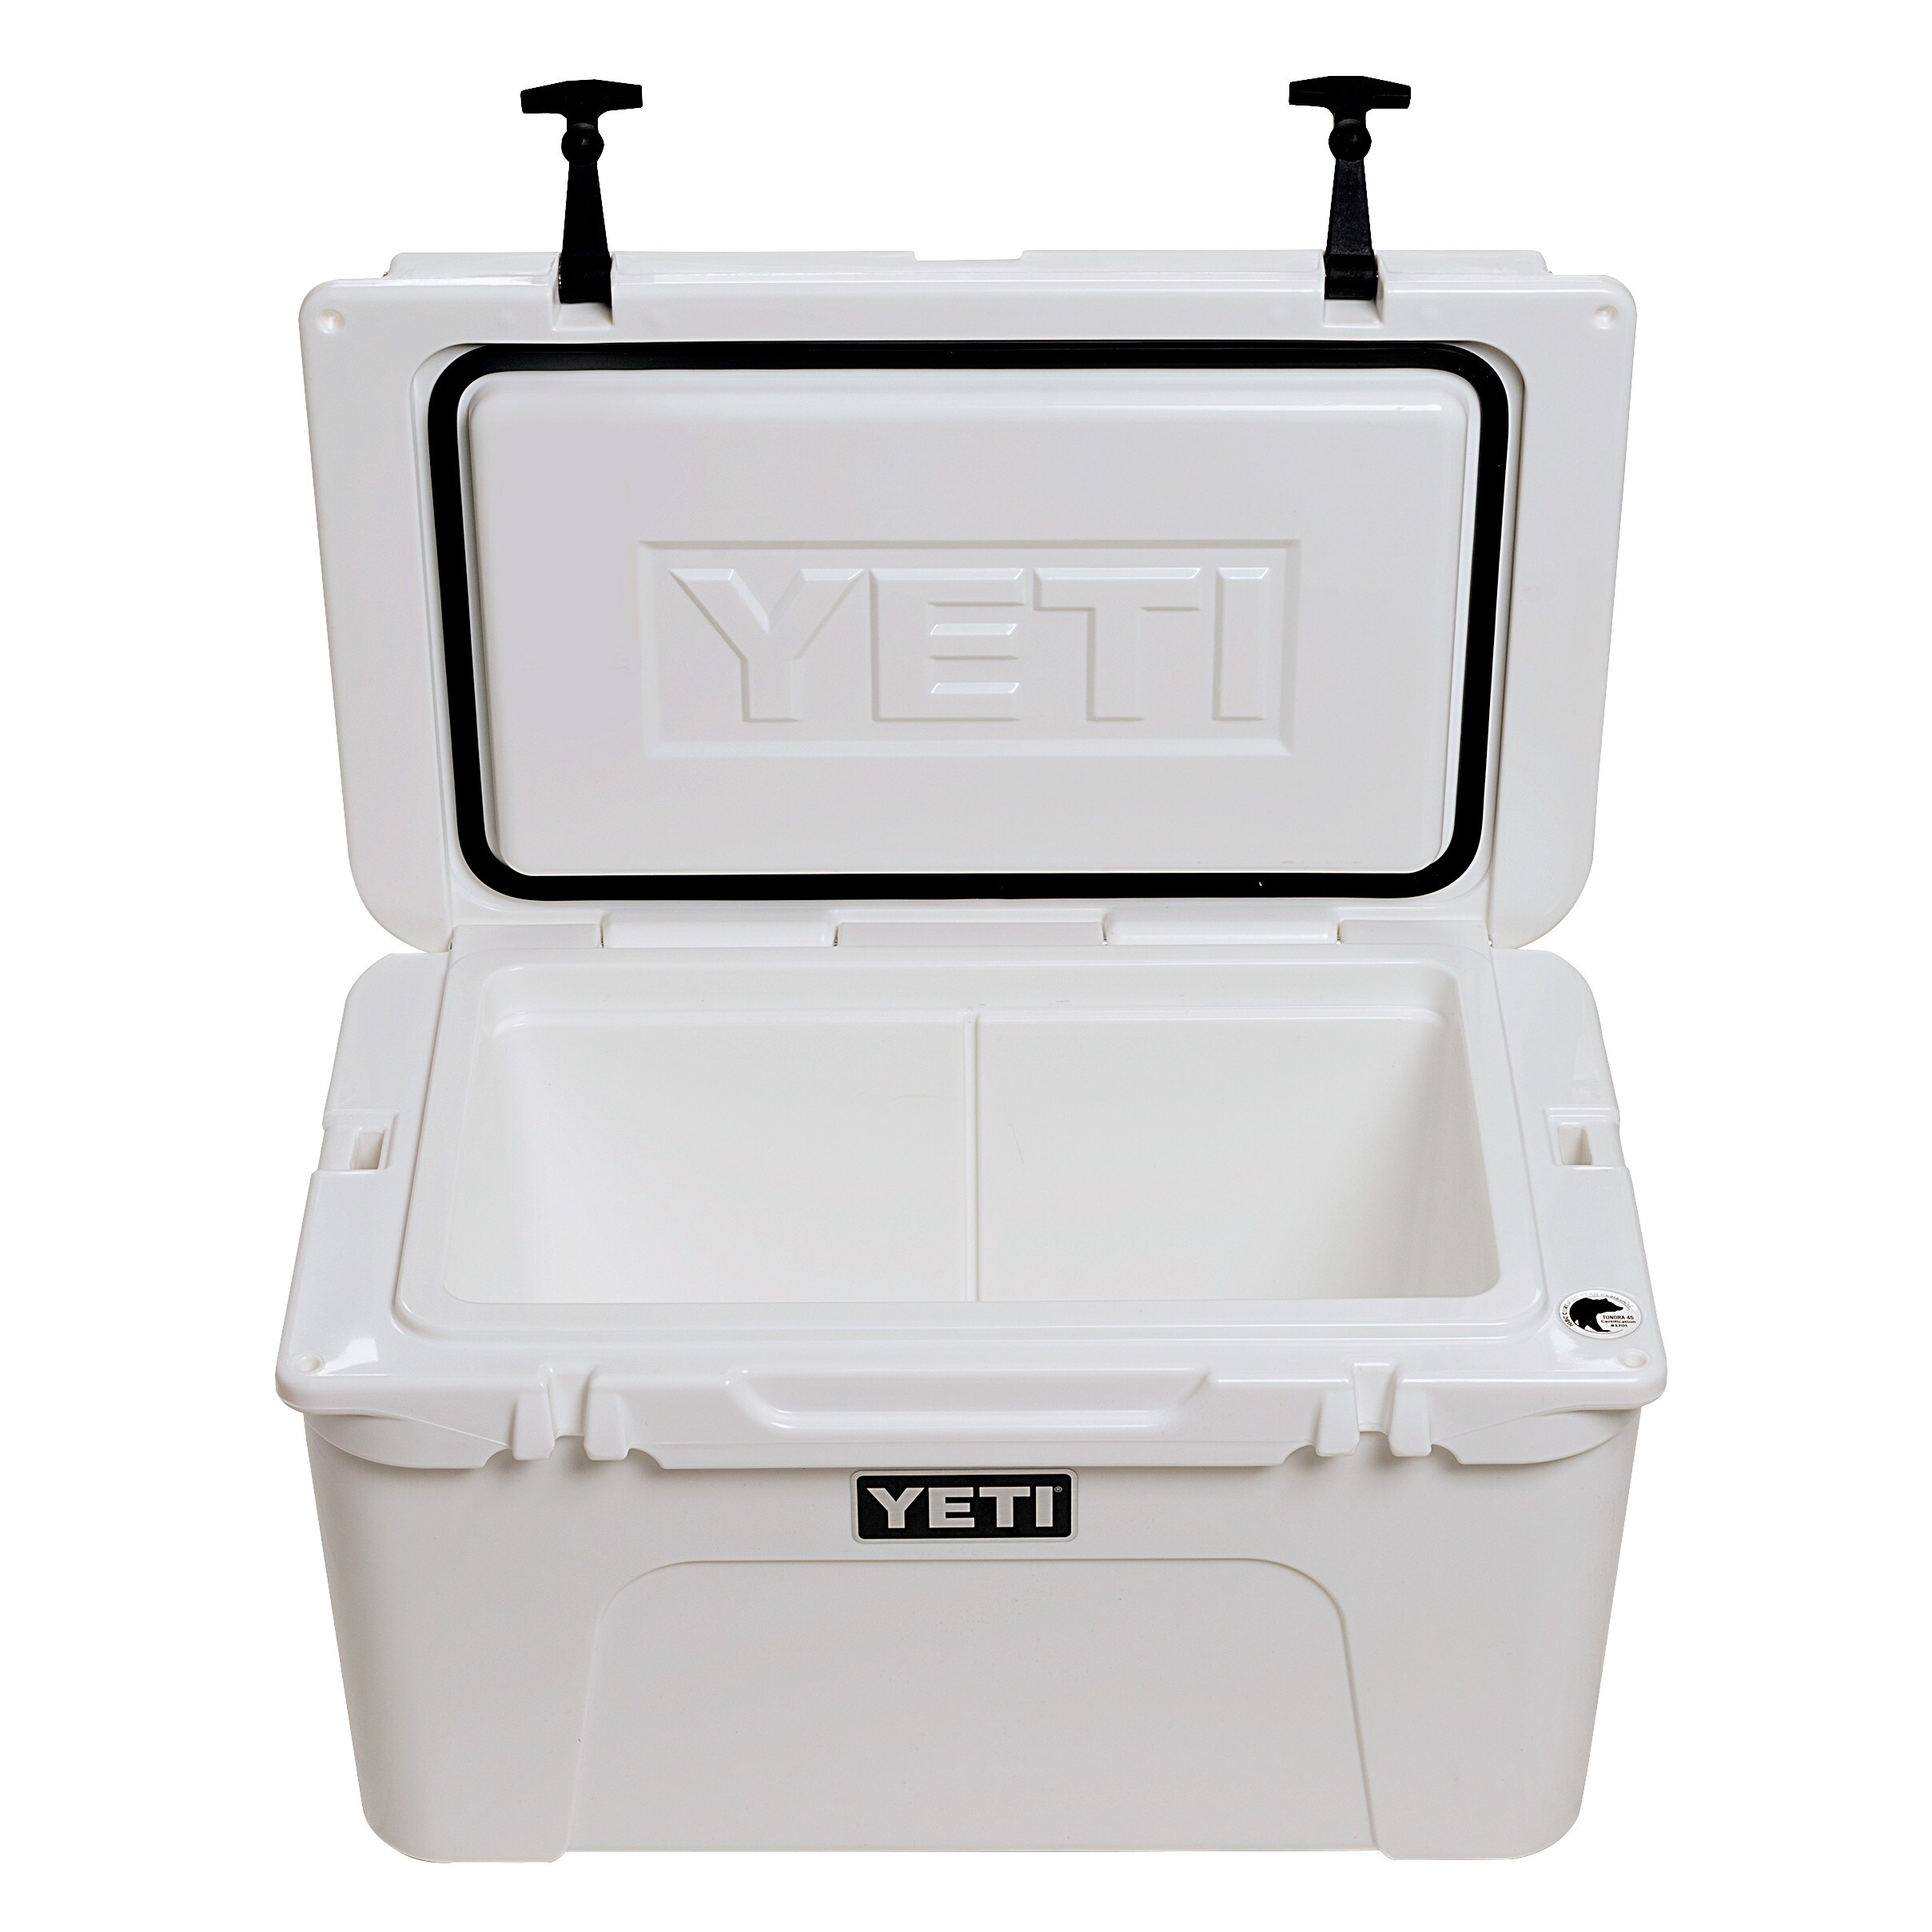 Yeti Tundra 45 Cooler - w/delivery - general for sale - by owner -  craigslist